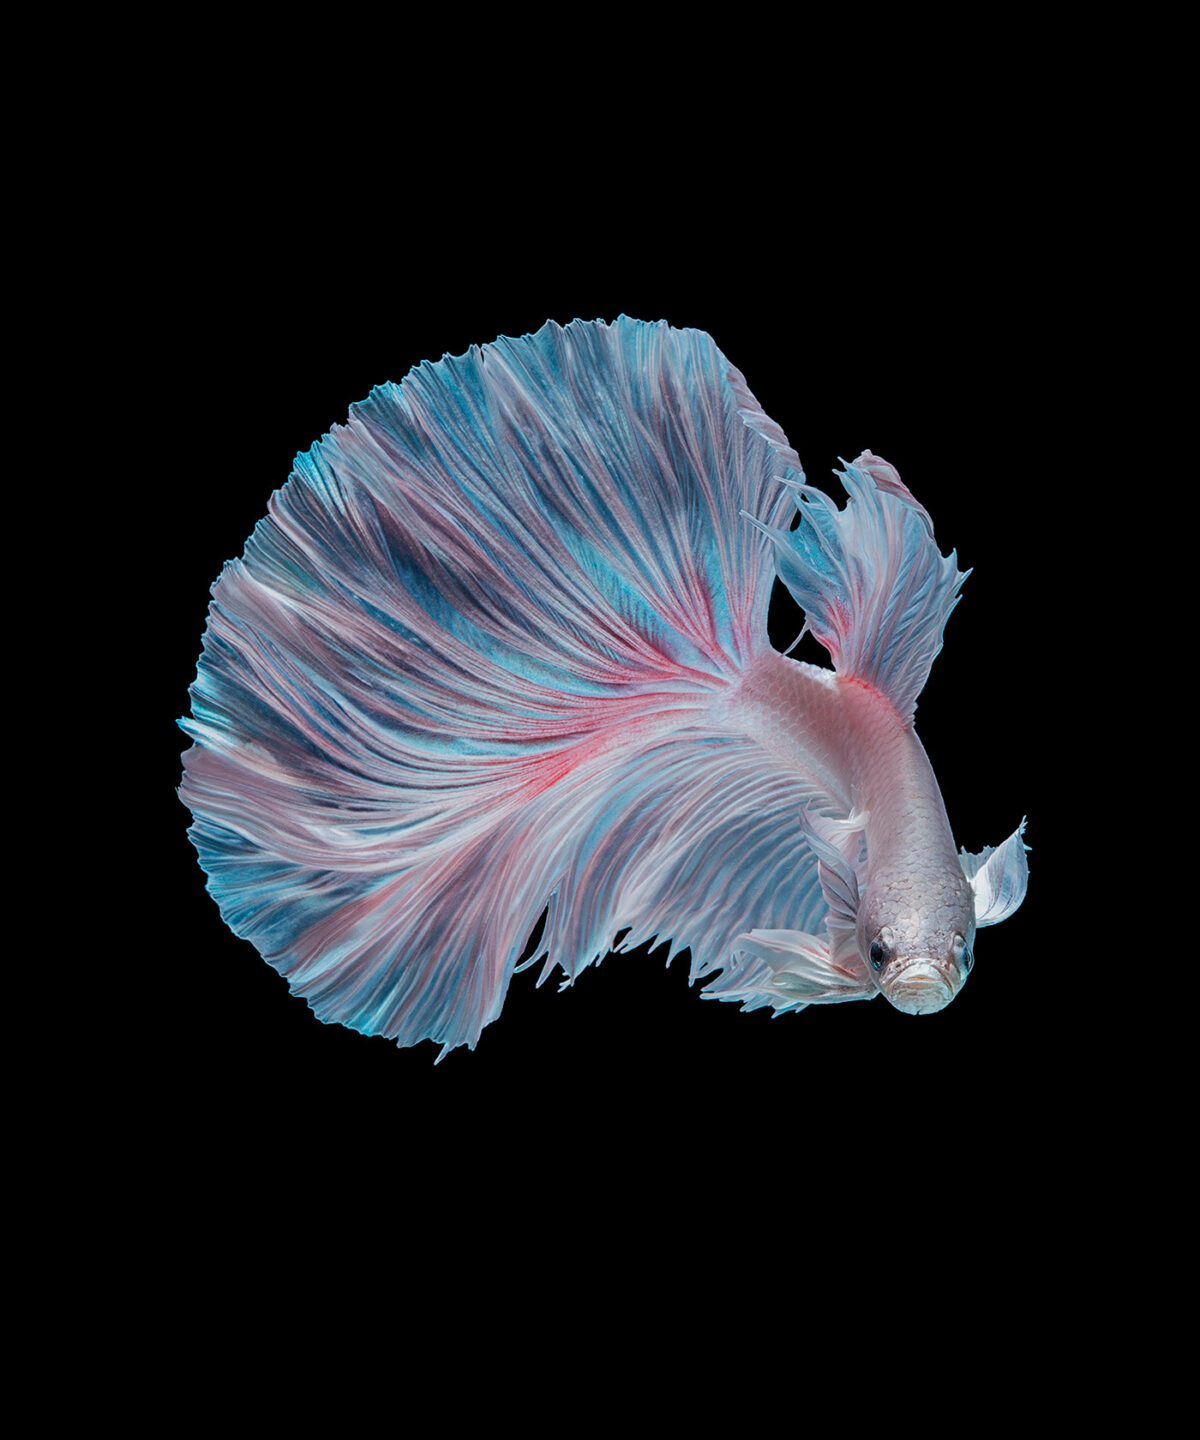 Marvelous Betta Fish Photography By Andi Halil (15)